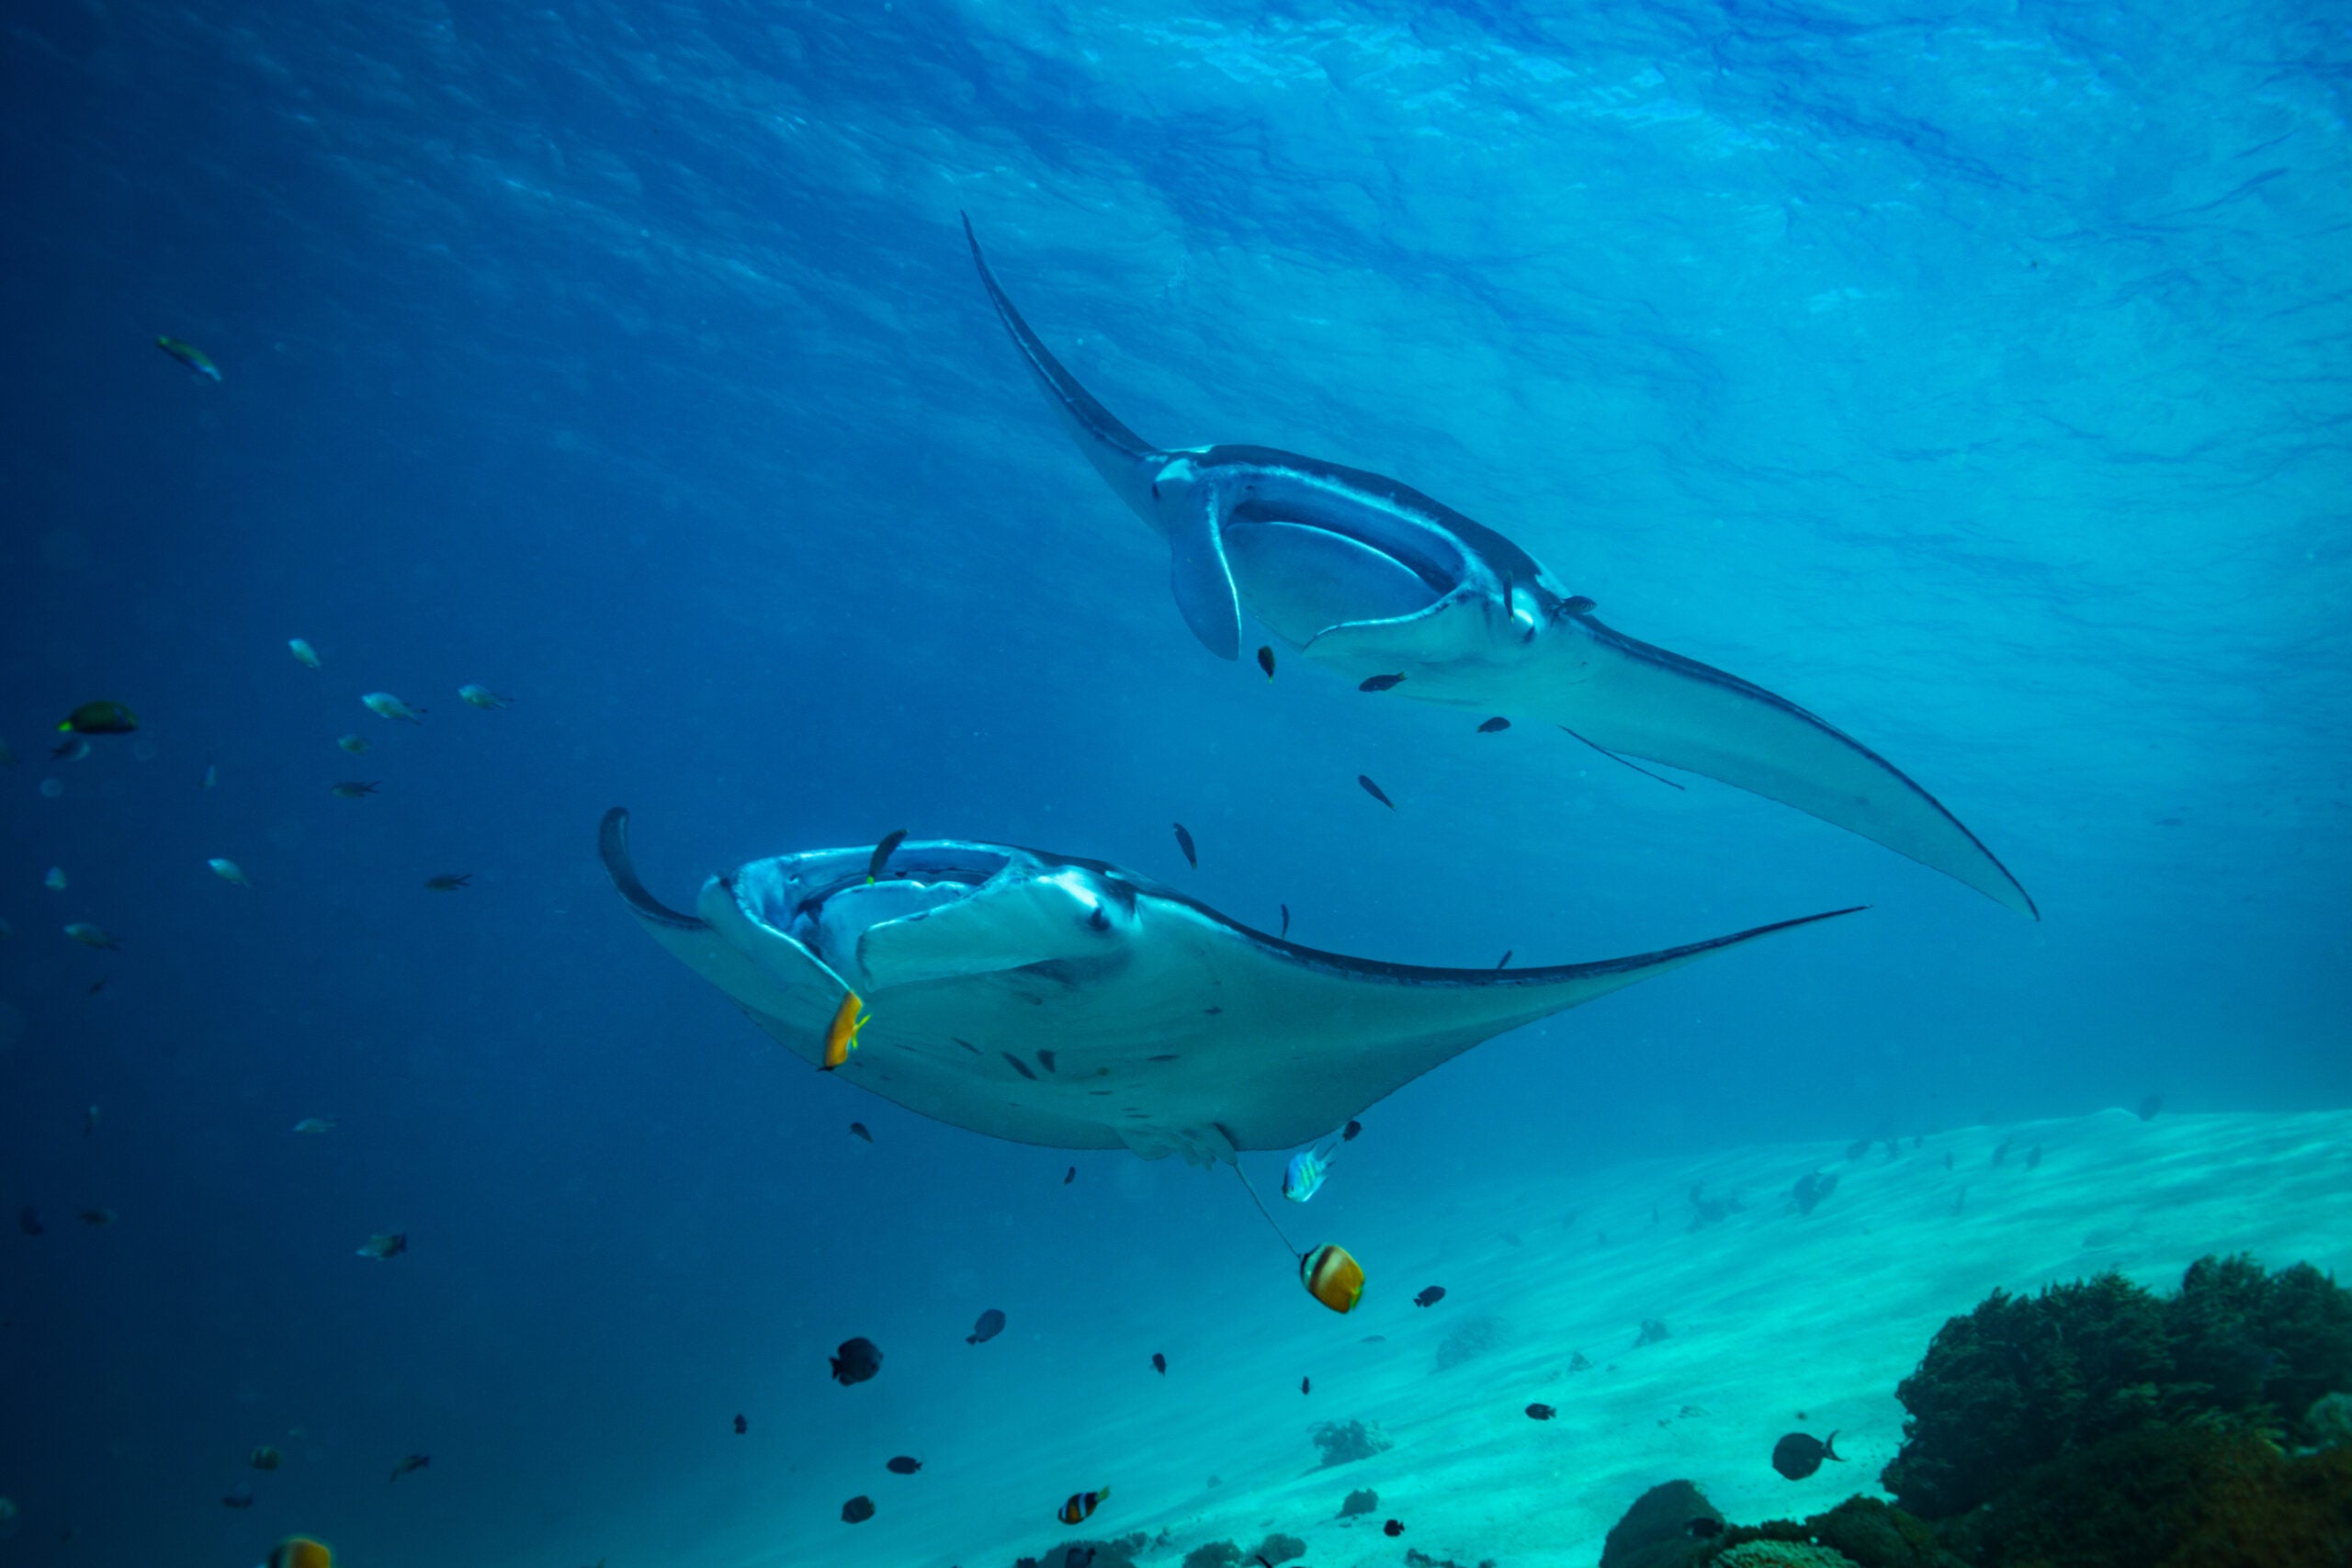 Manta ray brainpower blows other fish out of the water - Oceana